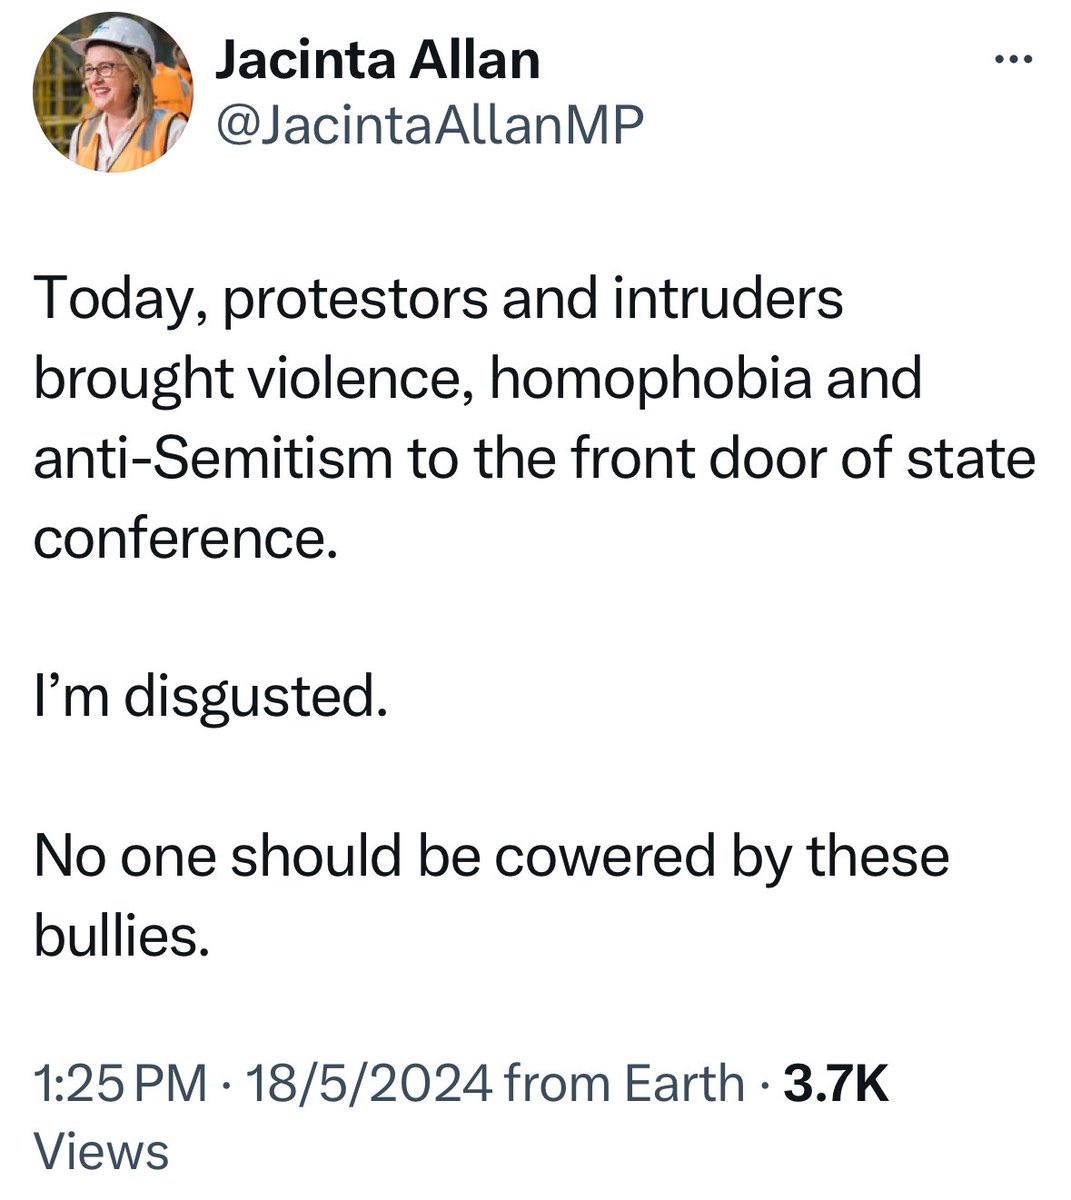 Jacinta Allan responds to pro-Palestine protesters at the Victorian Labor state conference “Protestors and intruders brought violence, homophobia and anti-Semitism to the front door of state conference. I’m disgusted. No one should be cowered by these bullies.”